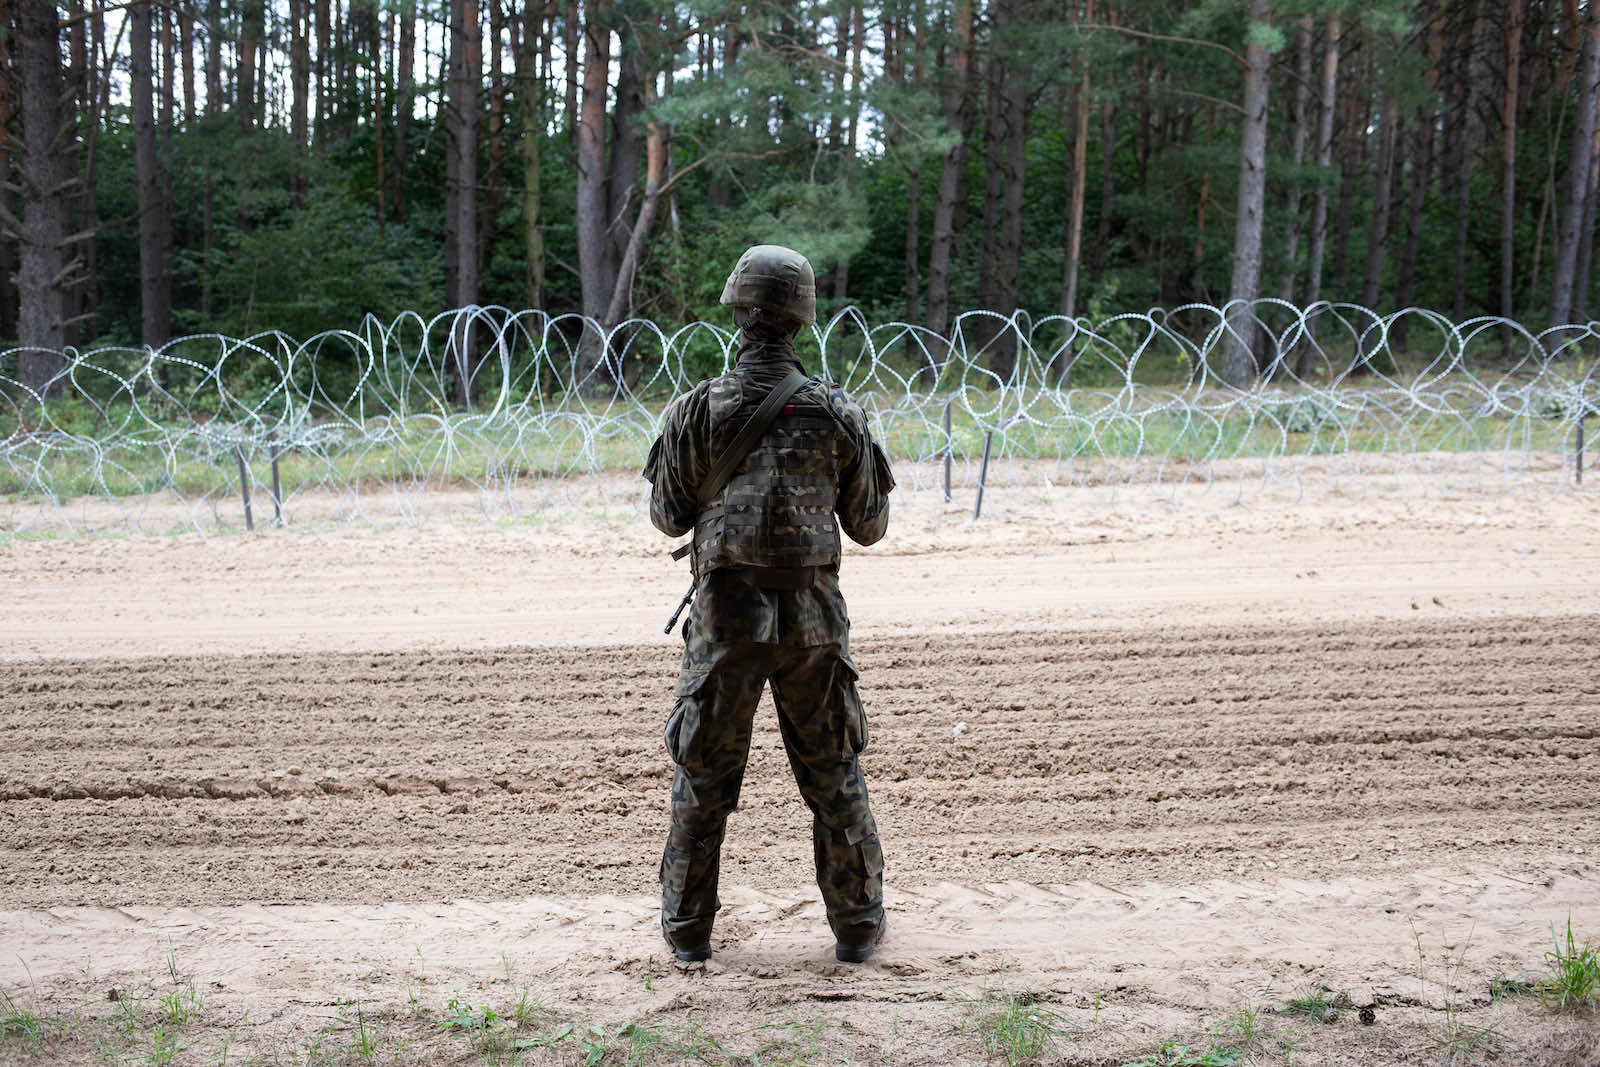 Razor wire fencing is thrown up along the Poland-Belarus border in August as migrant numbers surge (Maciej Moskwa/NurPhoto via Getty Images)